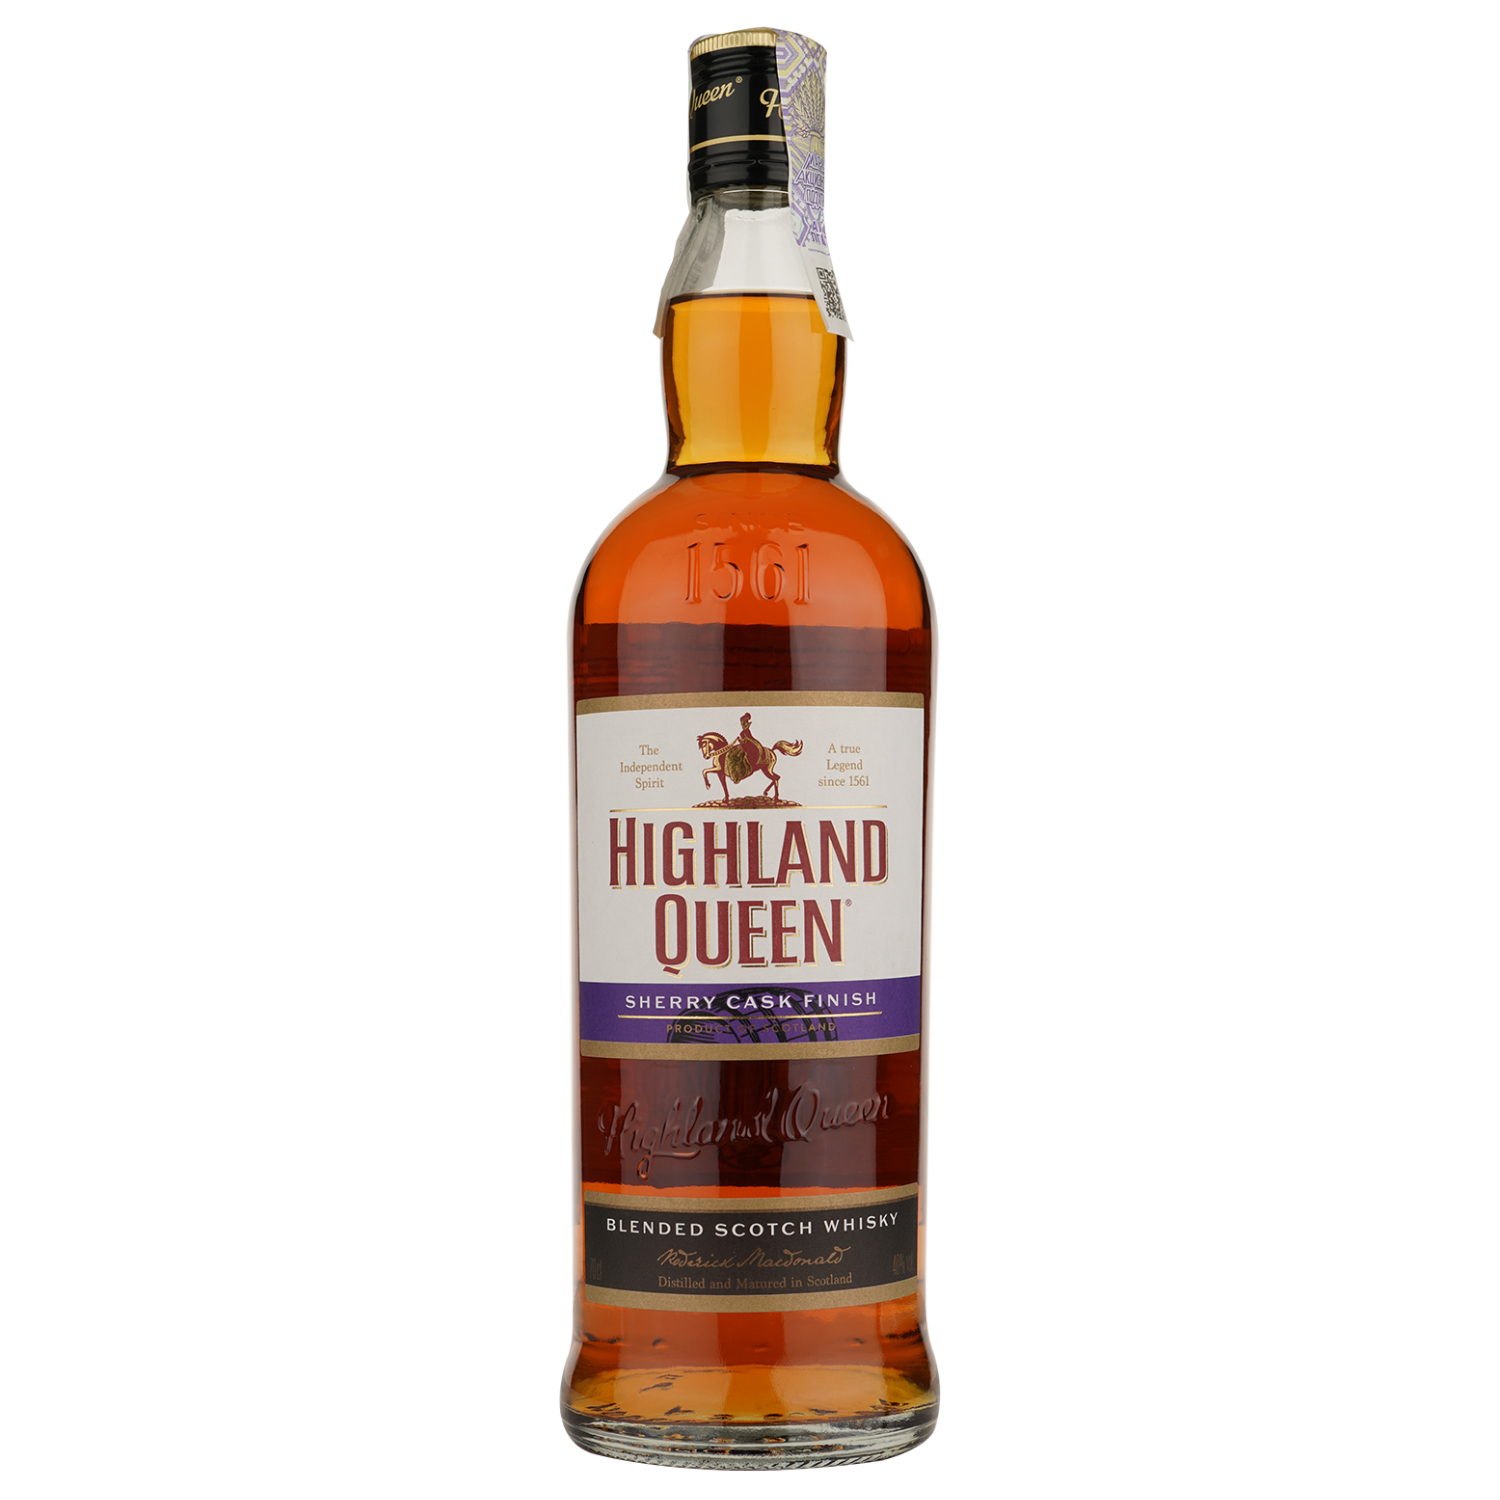 Виски Highland Queen Sherry Cask Finish Blended Scotch Whisky, 40%, 0,7 л - фото 1